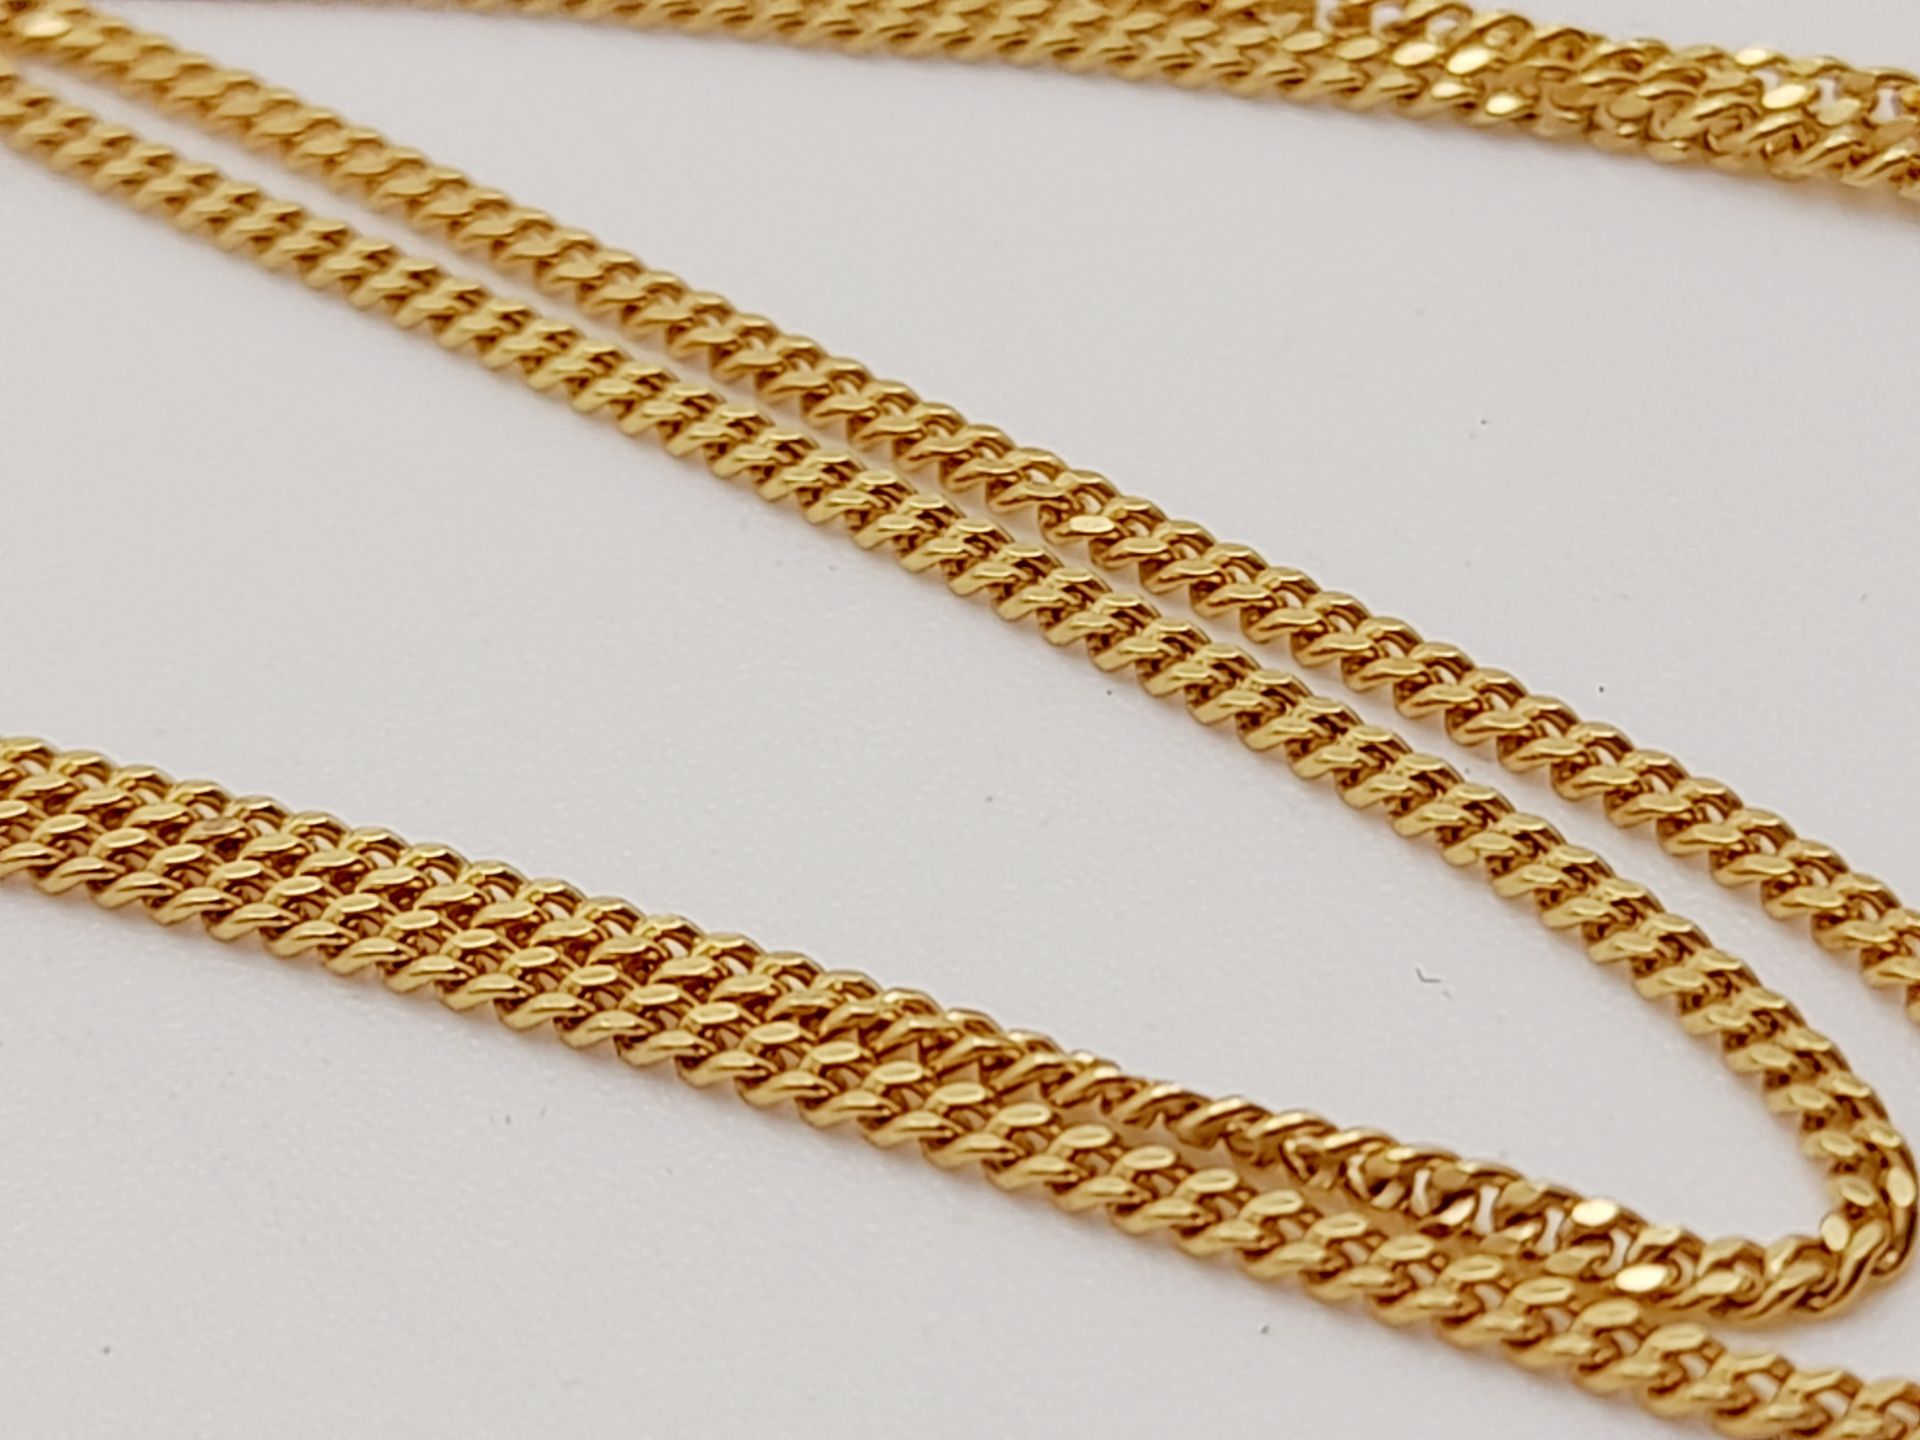 A 9 K yellow gold chain necklace with a cross pendant, chain length: 50 cm, cross height: 33 mm, - Image 2 of 5